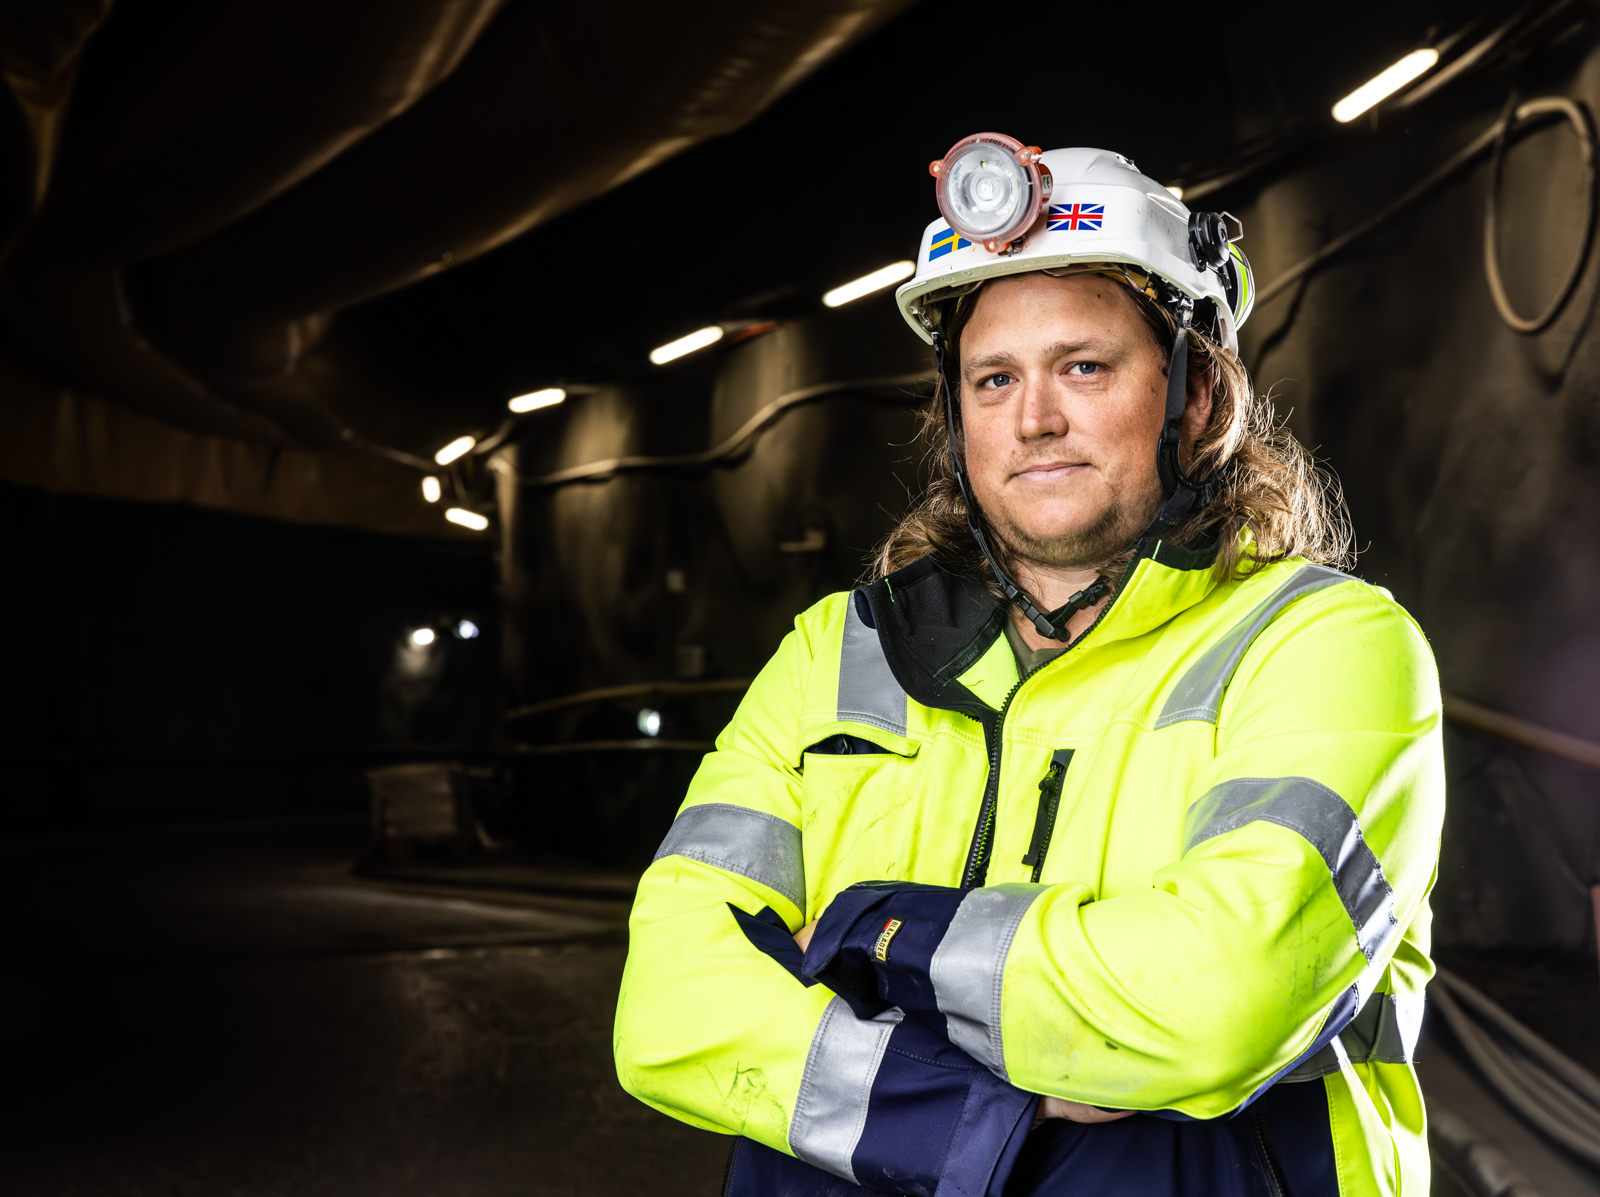 “We can't afford to stand still; any production stoppages are out of the question. Time is the most valuable asset we have here.” says Gustaf Marelius, Block Manager, Rock at Itinera.